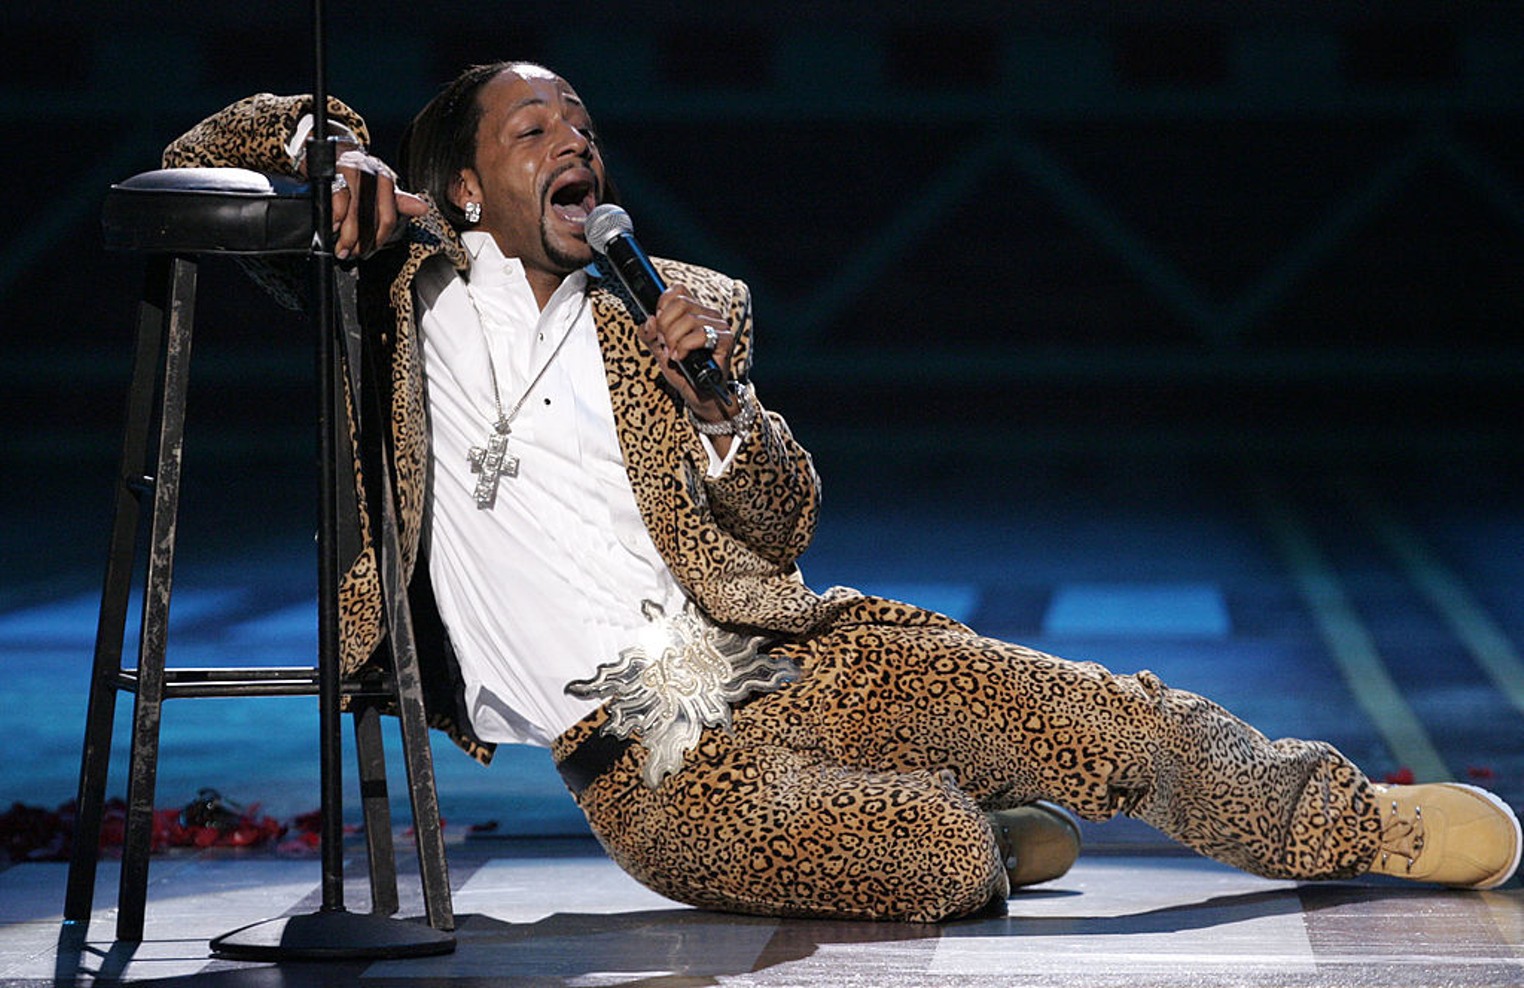 Katt Williams Adds Another Date to His Dallas Tour Stop Dallas Observer